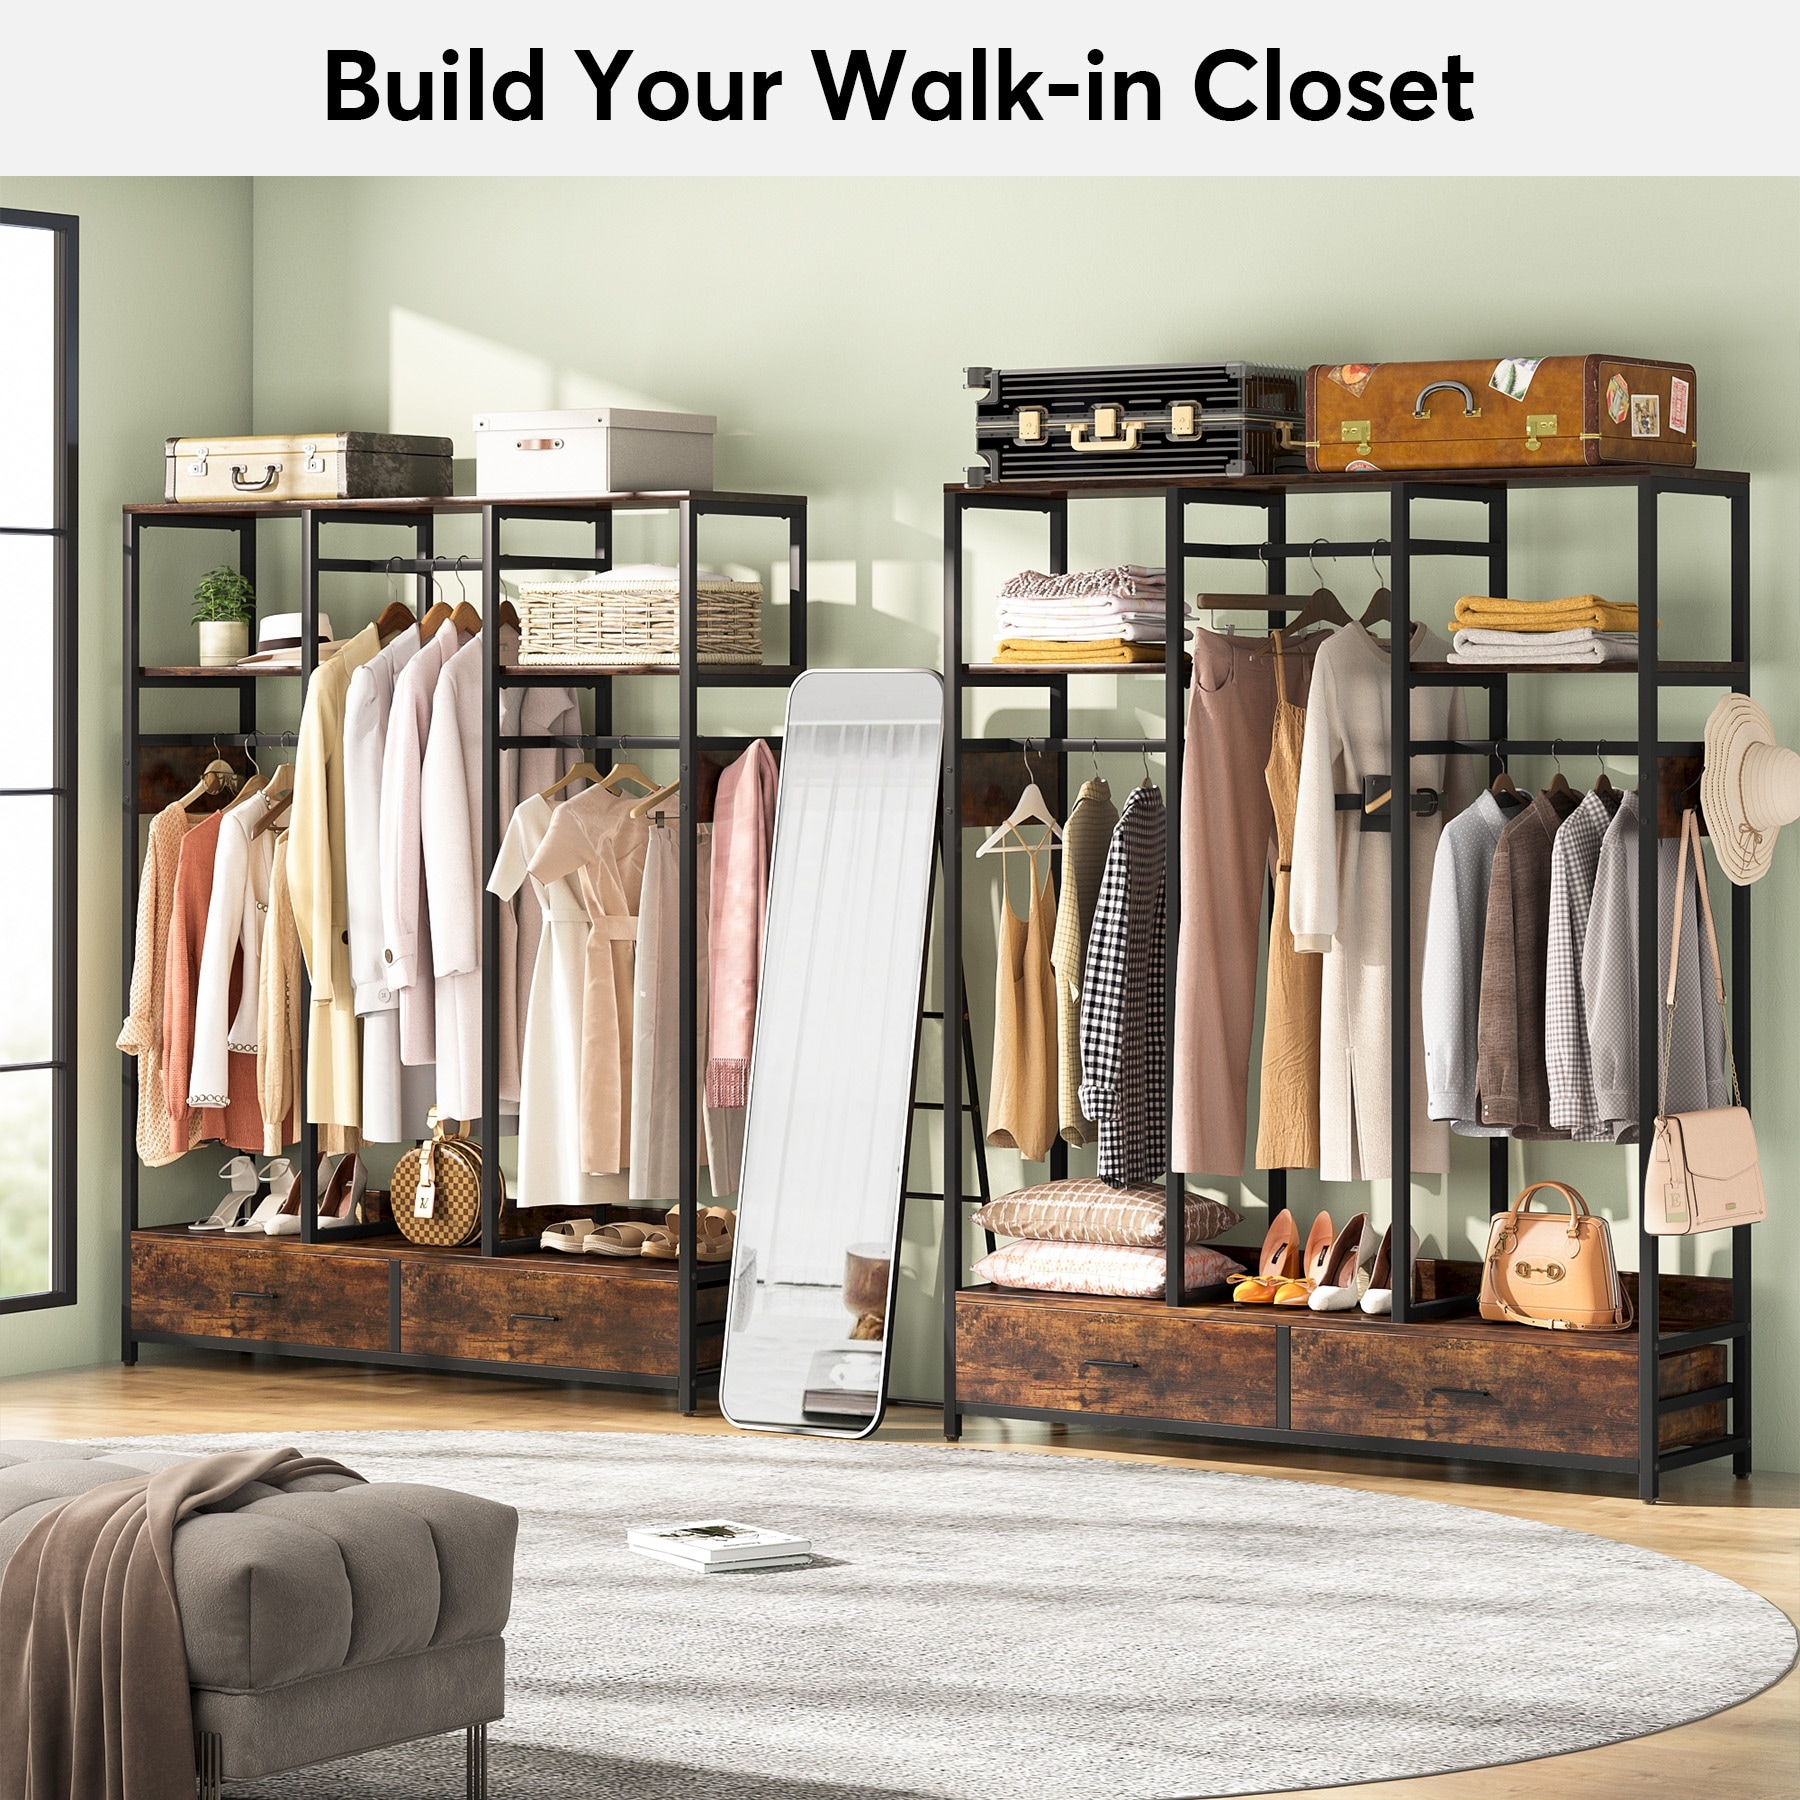 https://ak1.ostkcdn.com/images/products/is/images/direct/f541f996a46e87f023bbf579e0496a5853aae9ec/Freestanding-Closet-Organizer-with-Drawers-and-Hanging-Rod-Clothes-Garment-Rack-Organizer.jpg